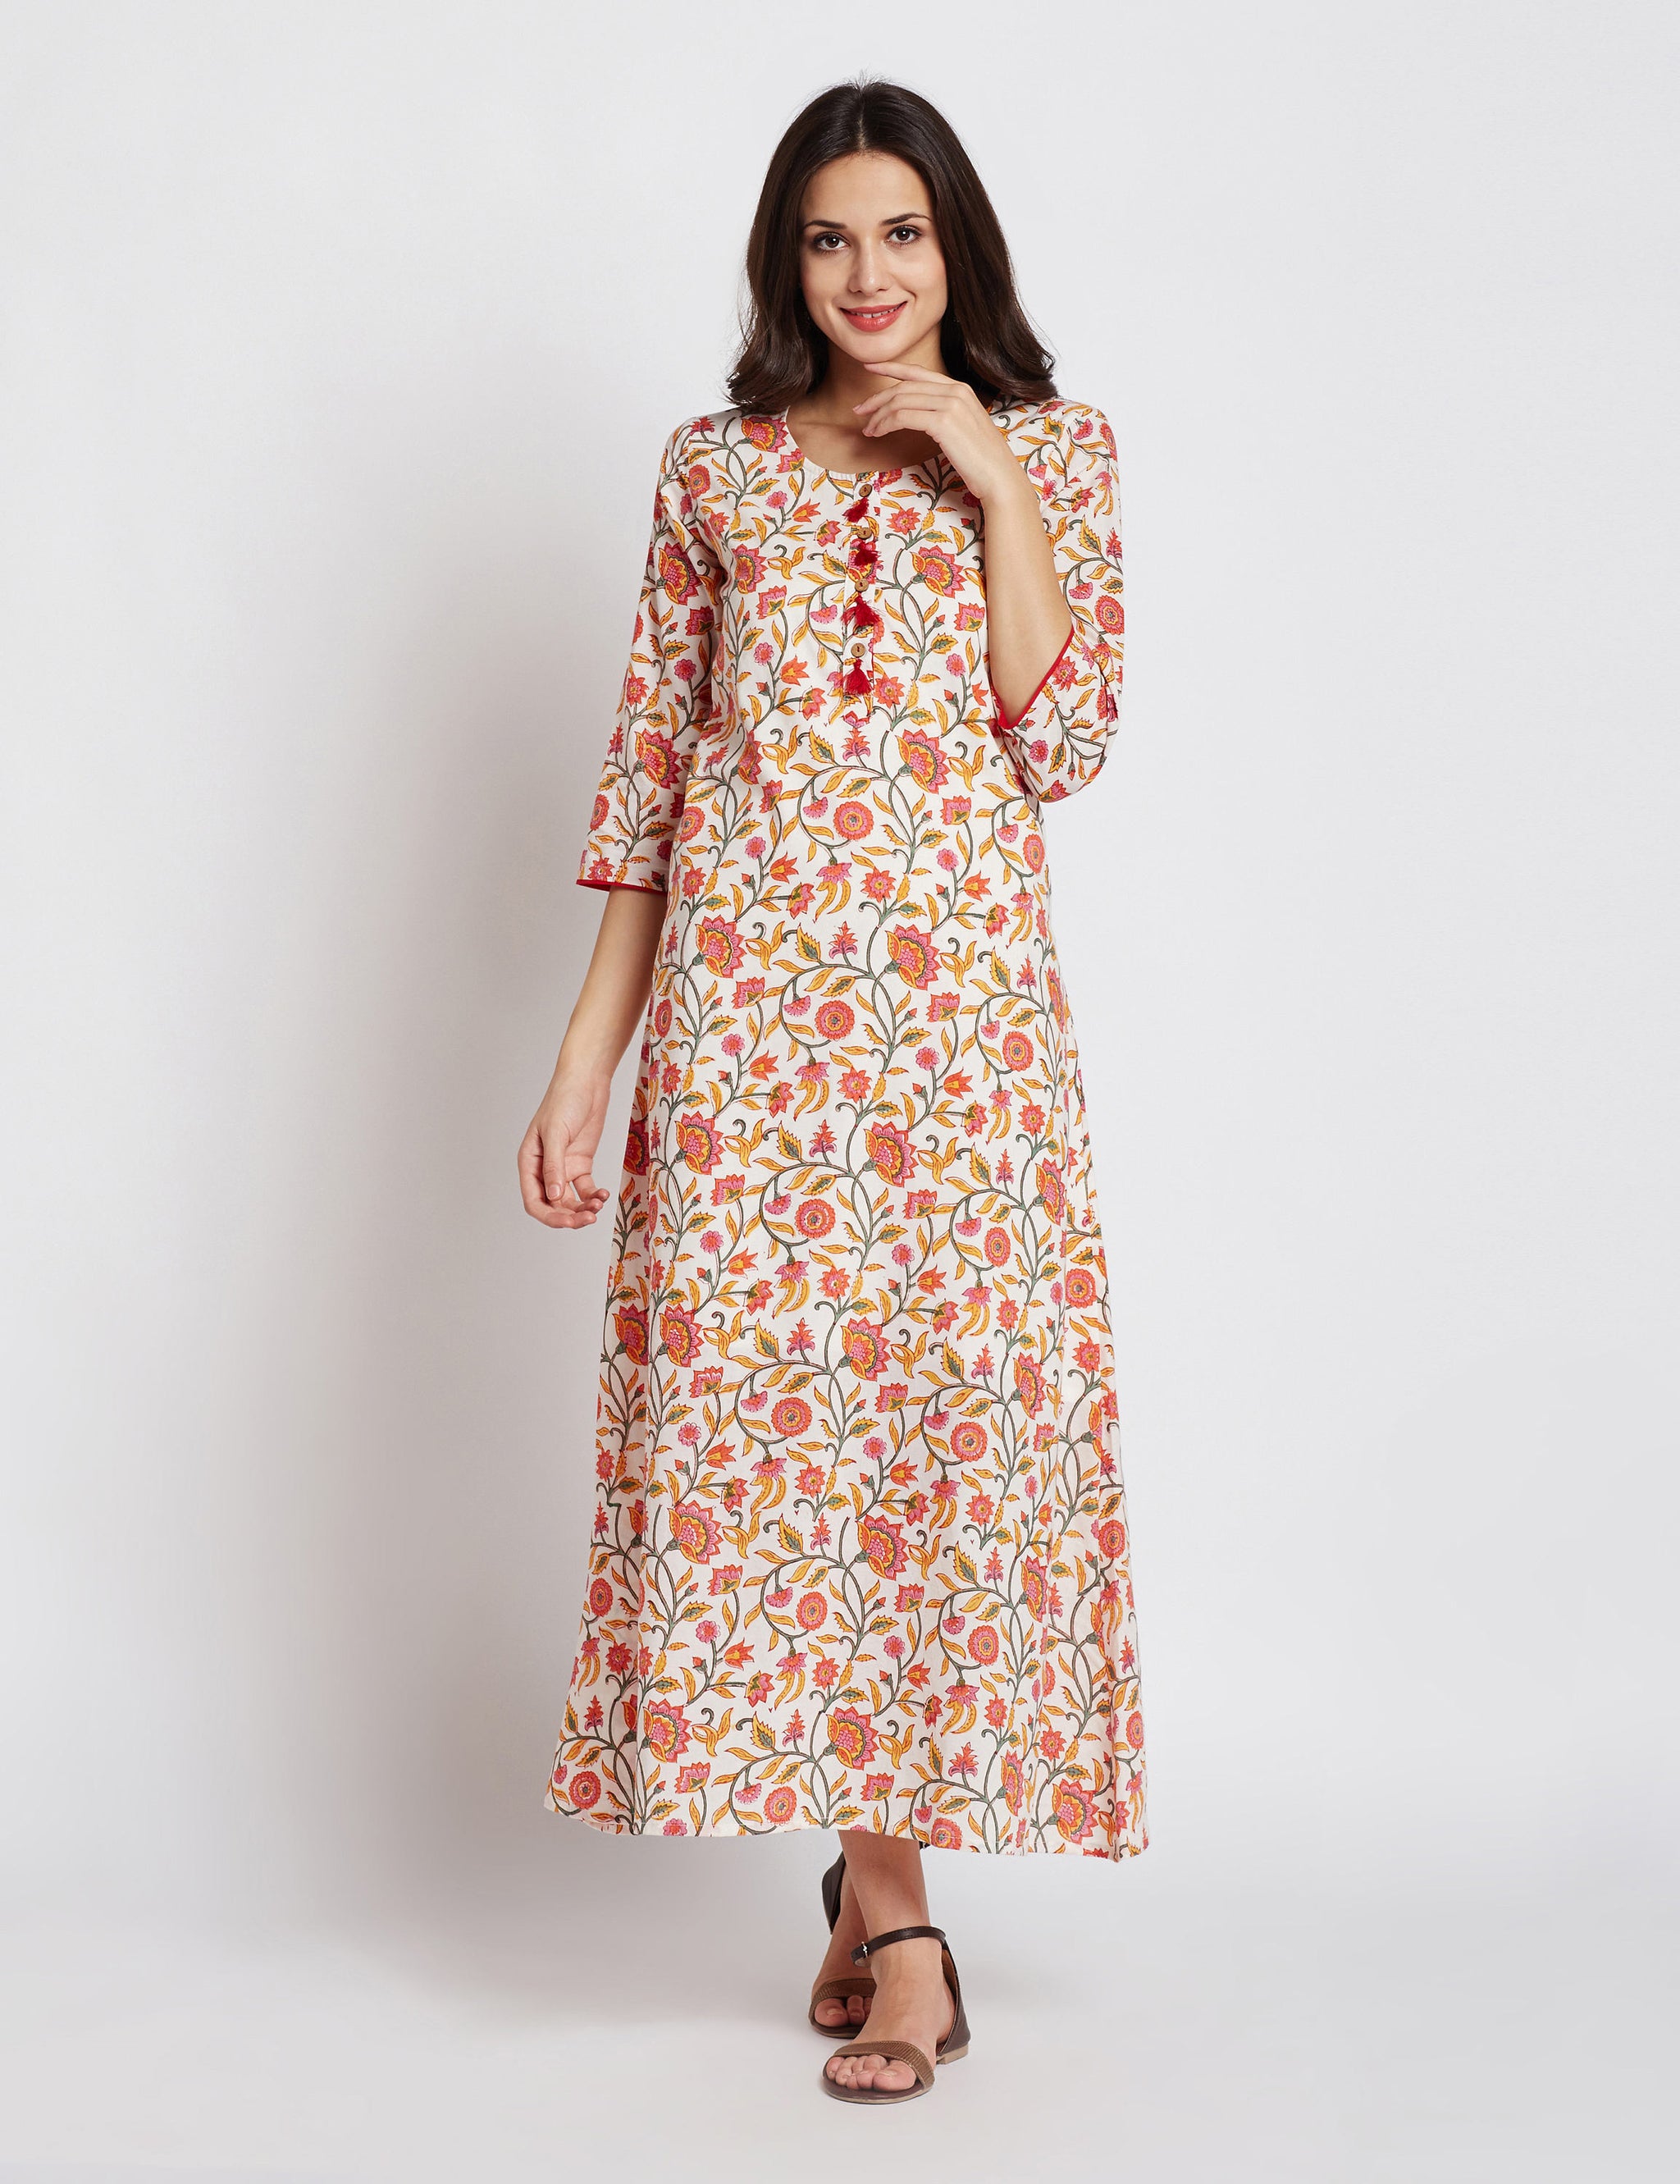 Hand block white floral printed one piece long dress - KanisaCrafts